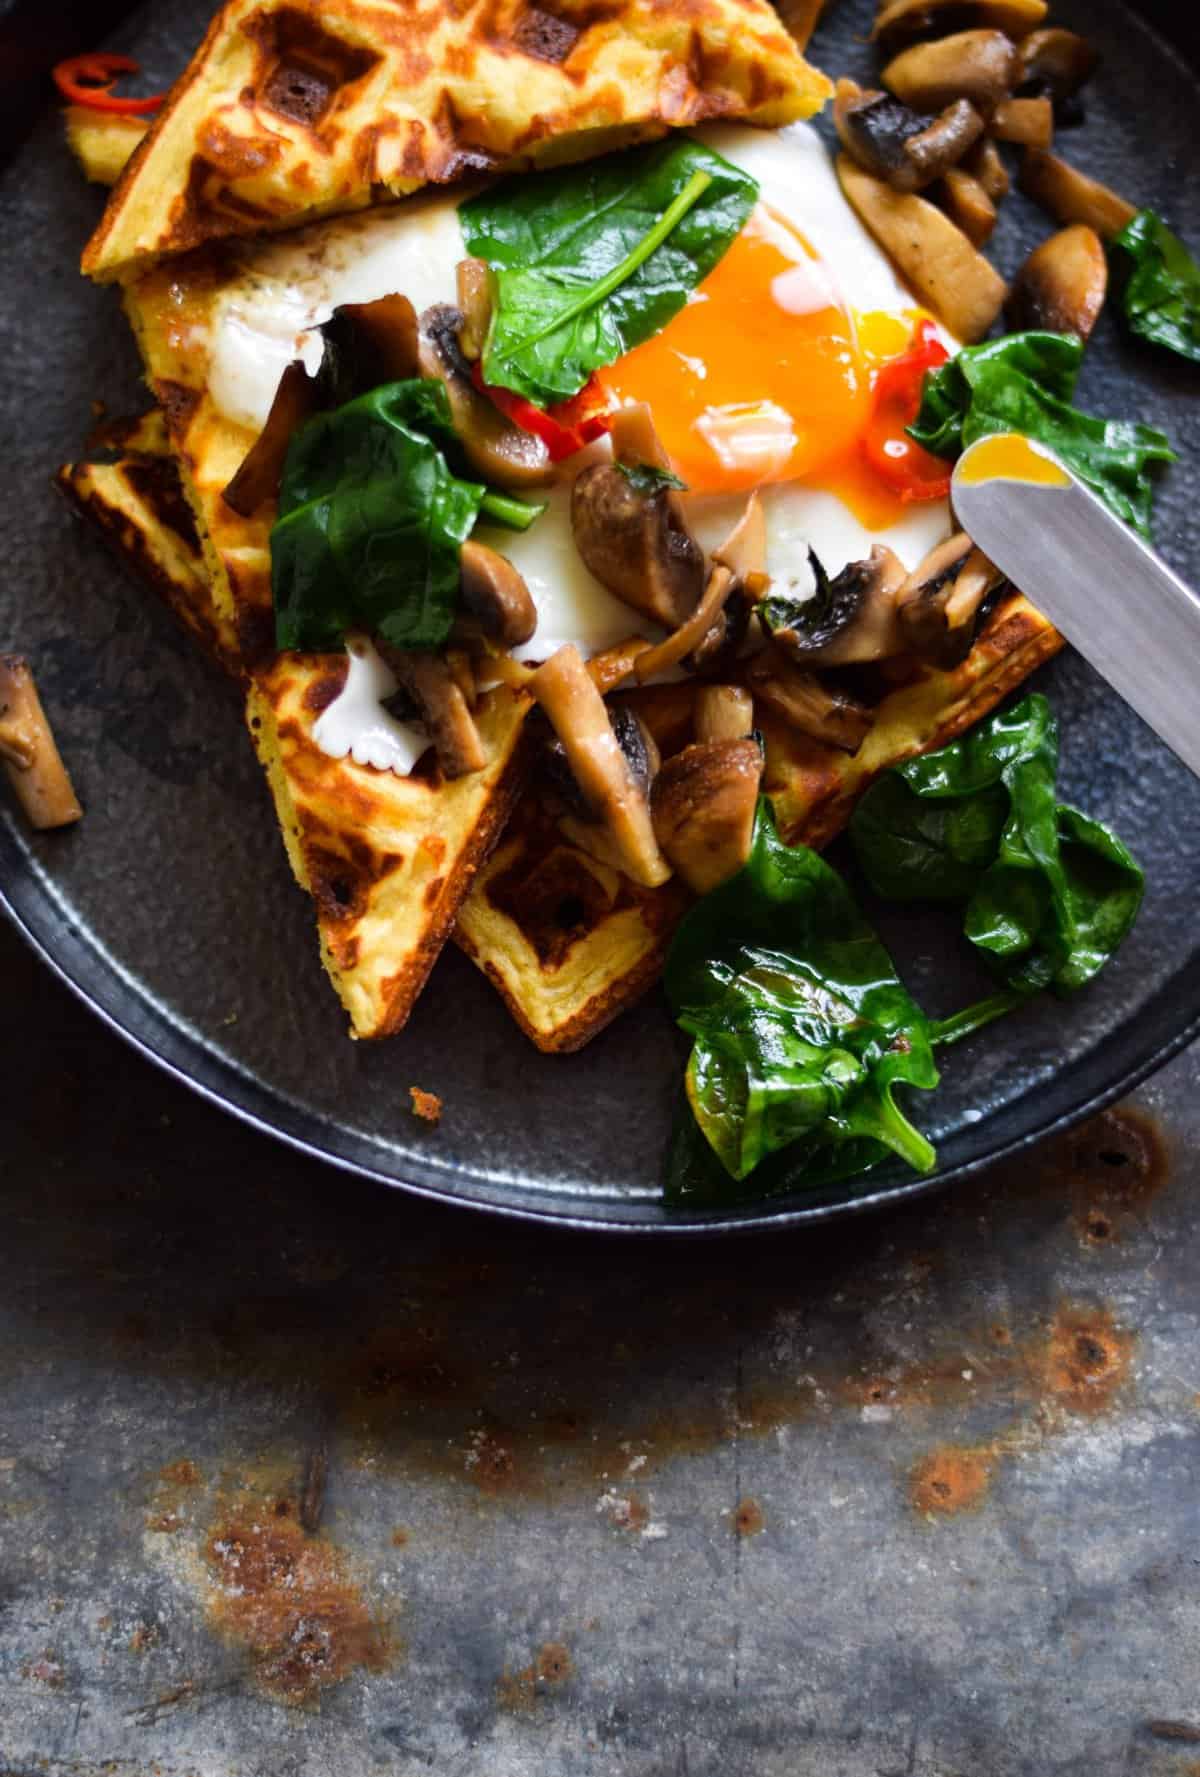 An aerial image of a dark ceramic plate topped with chickpea flour waffles. The waffles are served with a runny fried egg, greens and some mushrooms. They sit atop a dark blue table